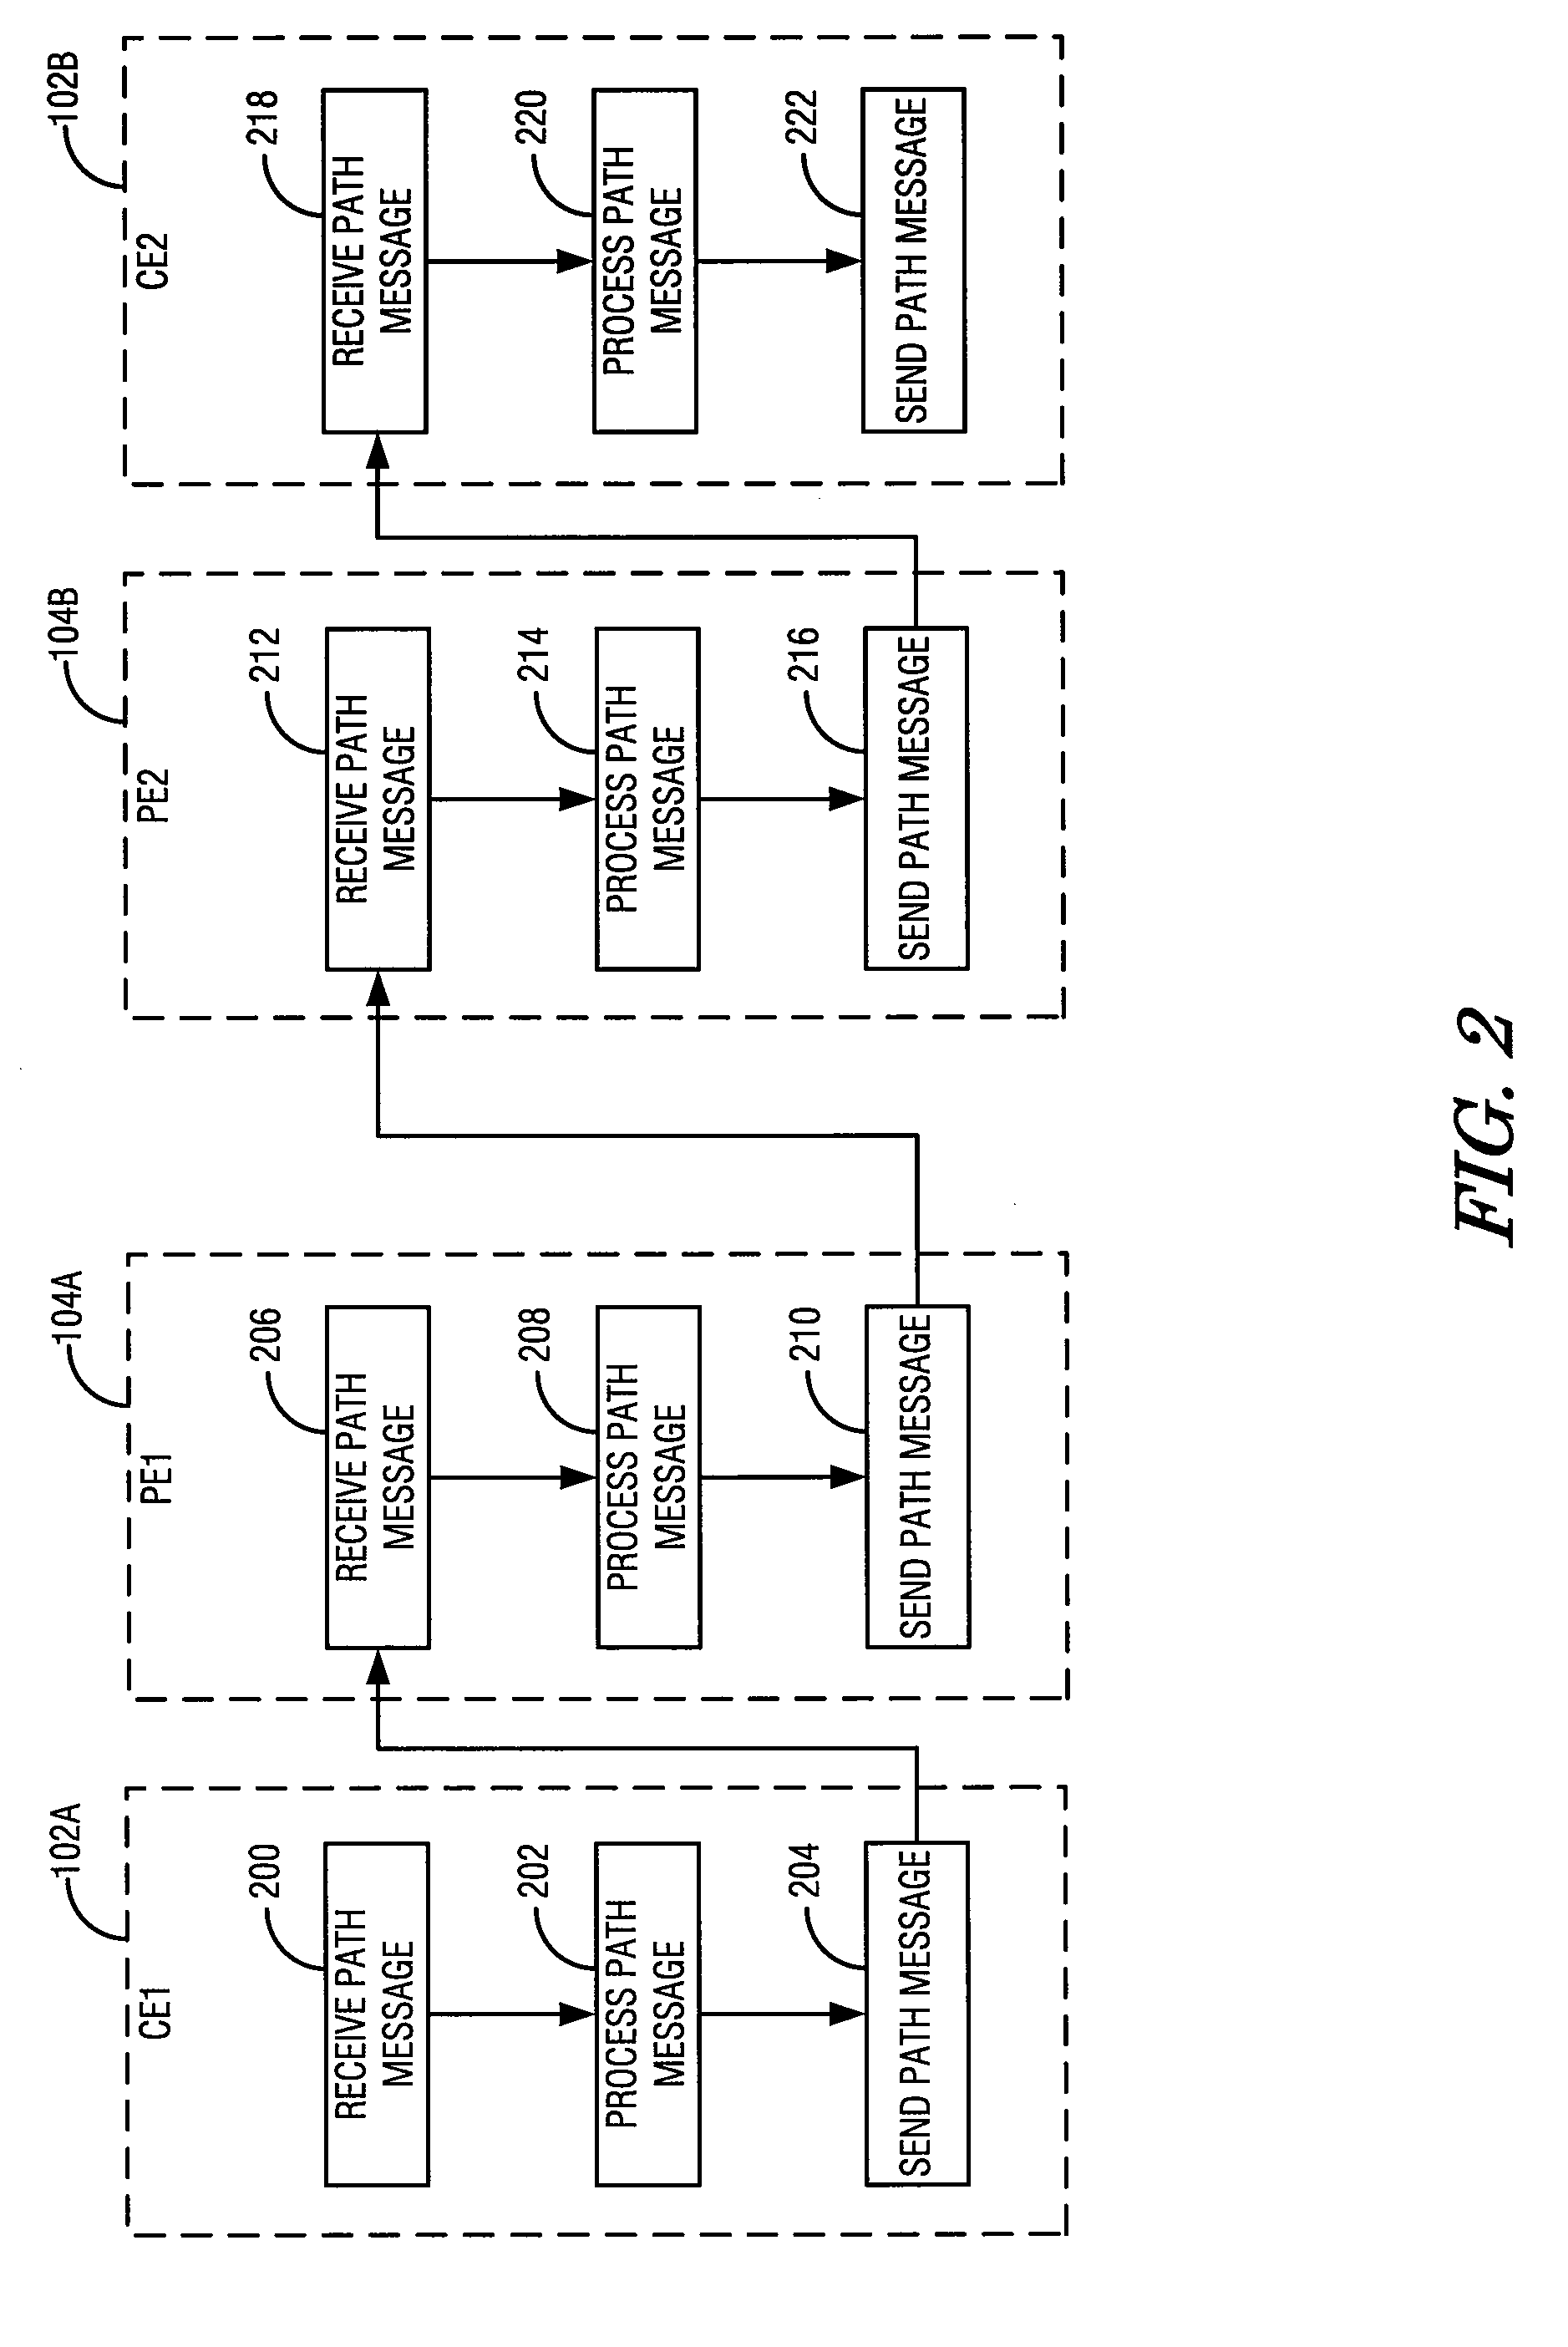 Pure control-plane approach for on-path connection admission control operations in multiprotocol label switching virtual private networks